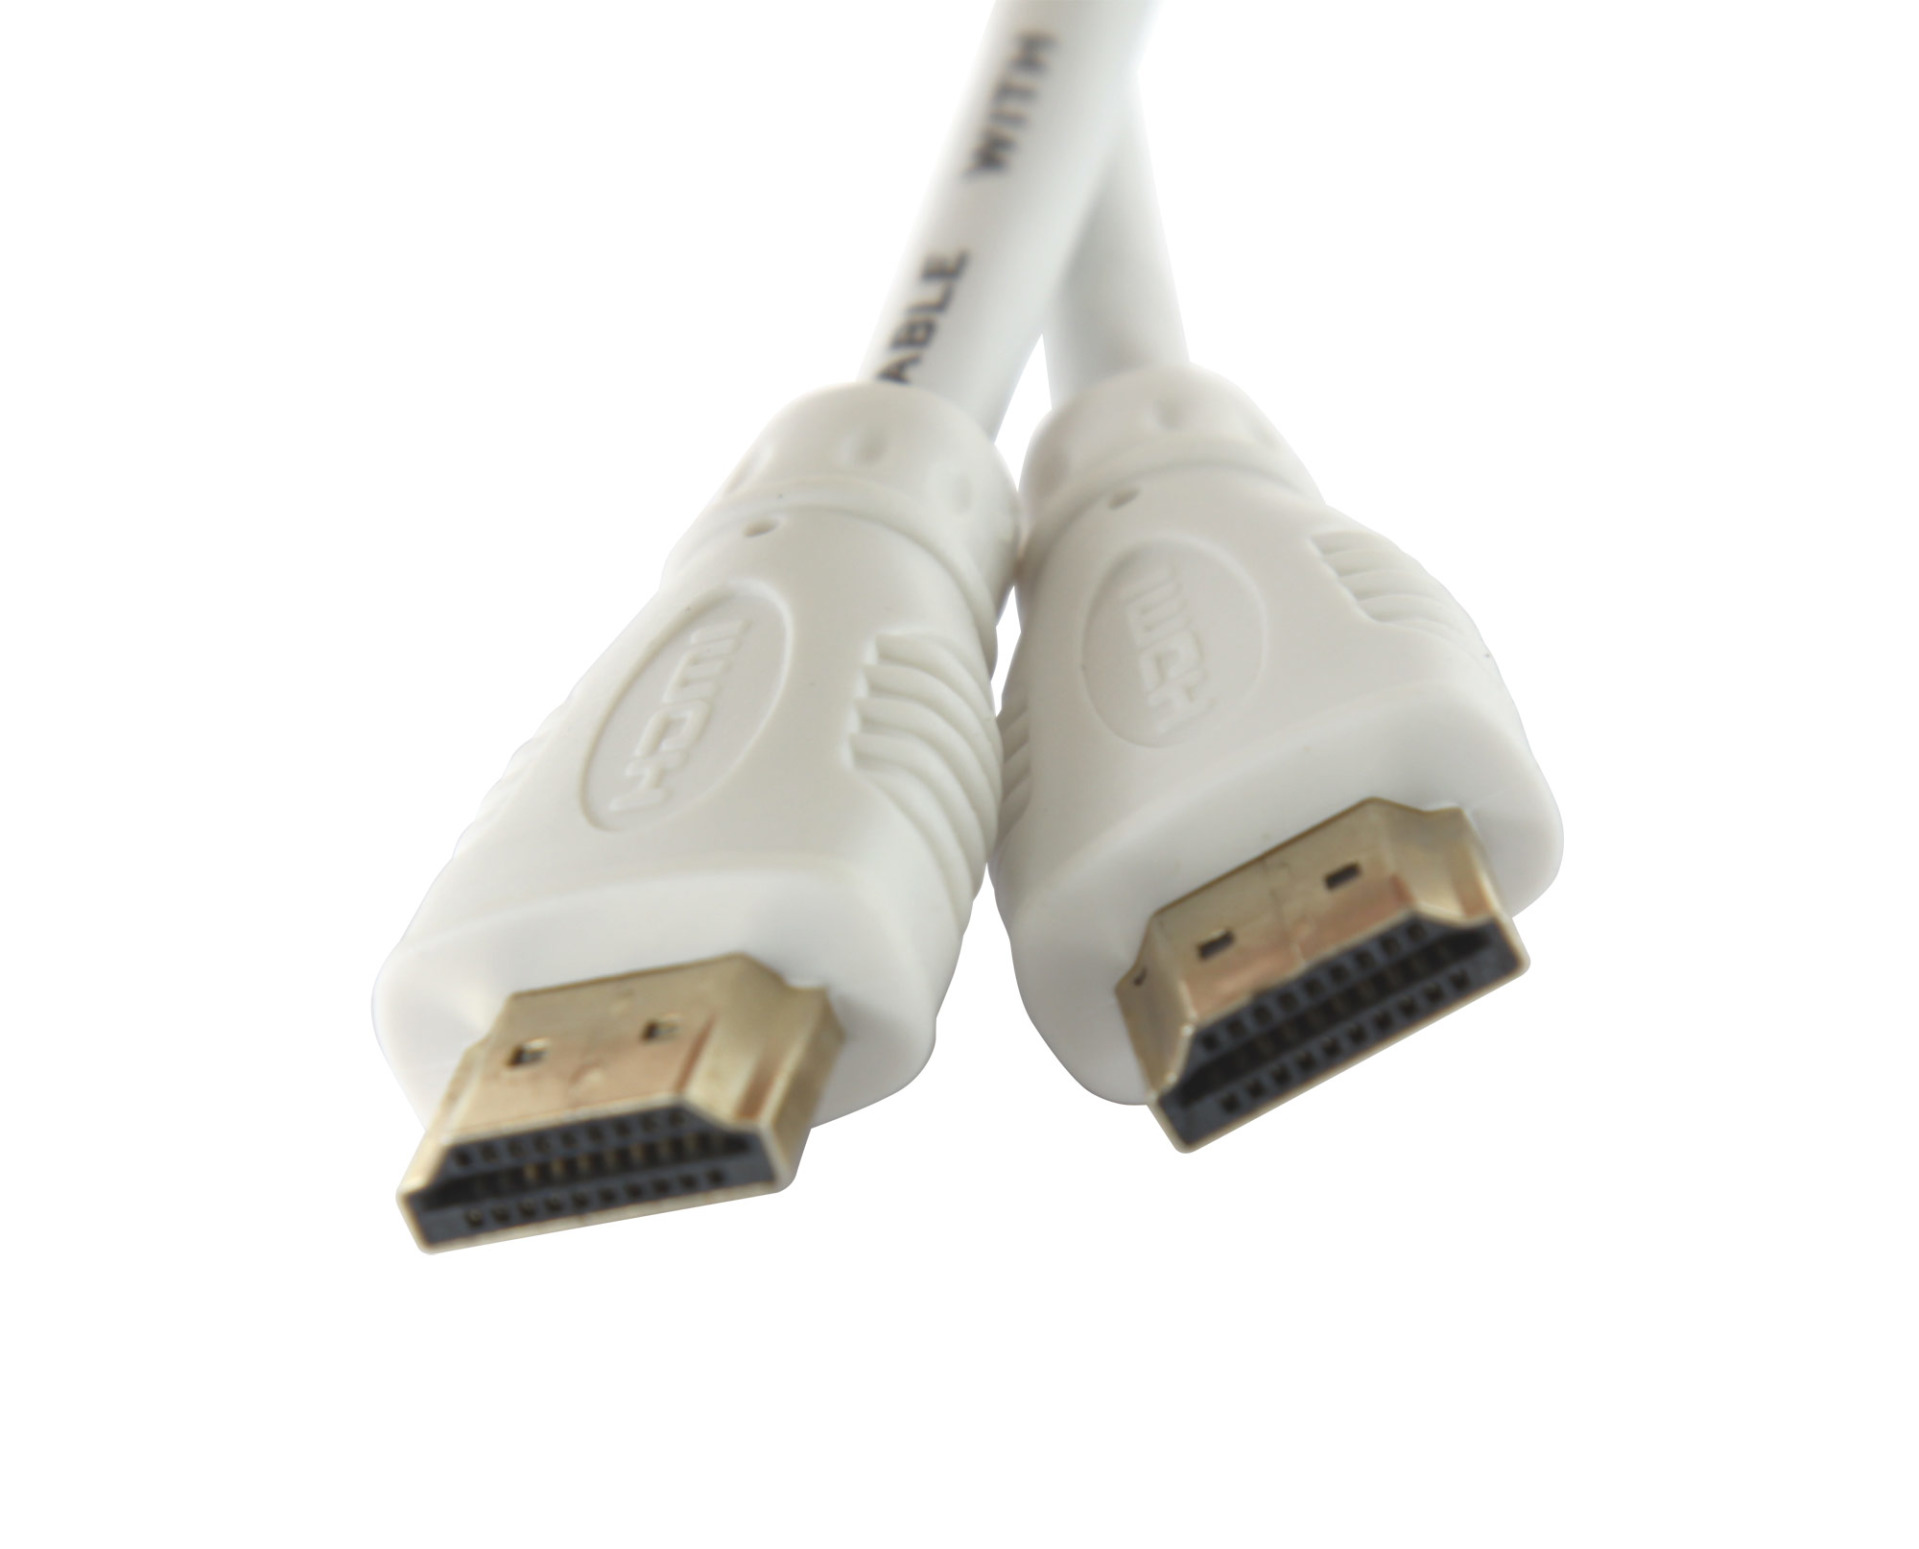 High Speed HDMI Cable with Ethernet, white, 1m